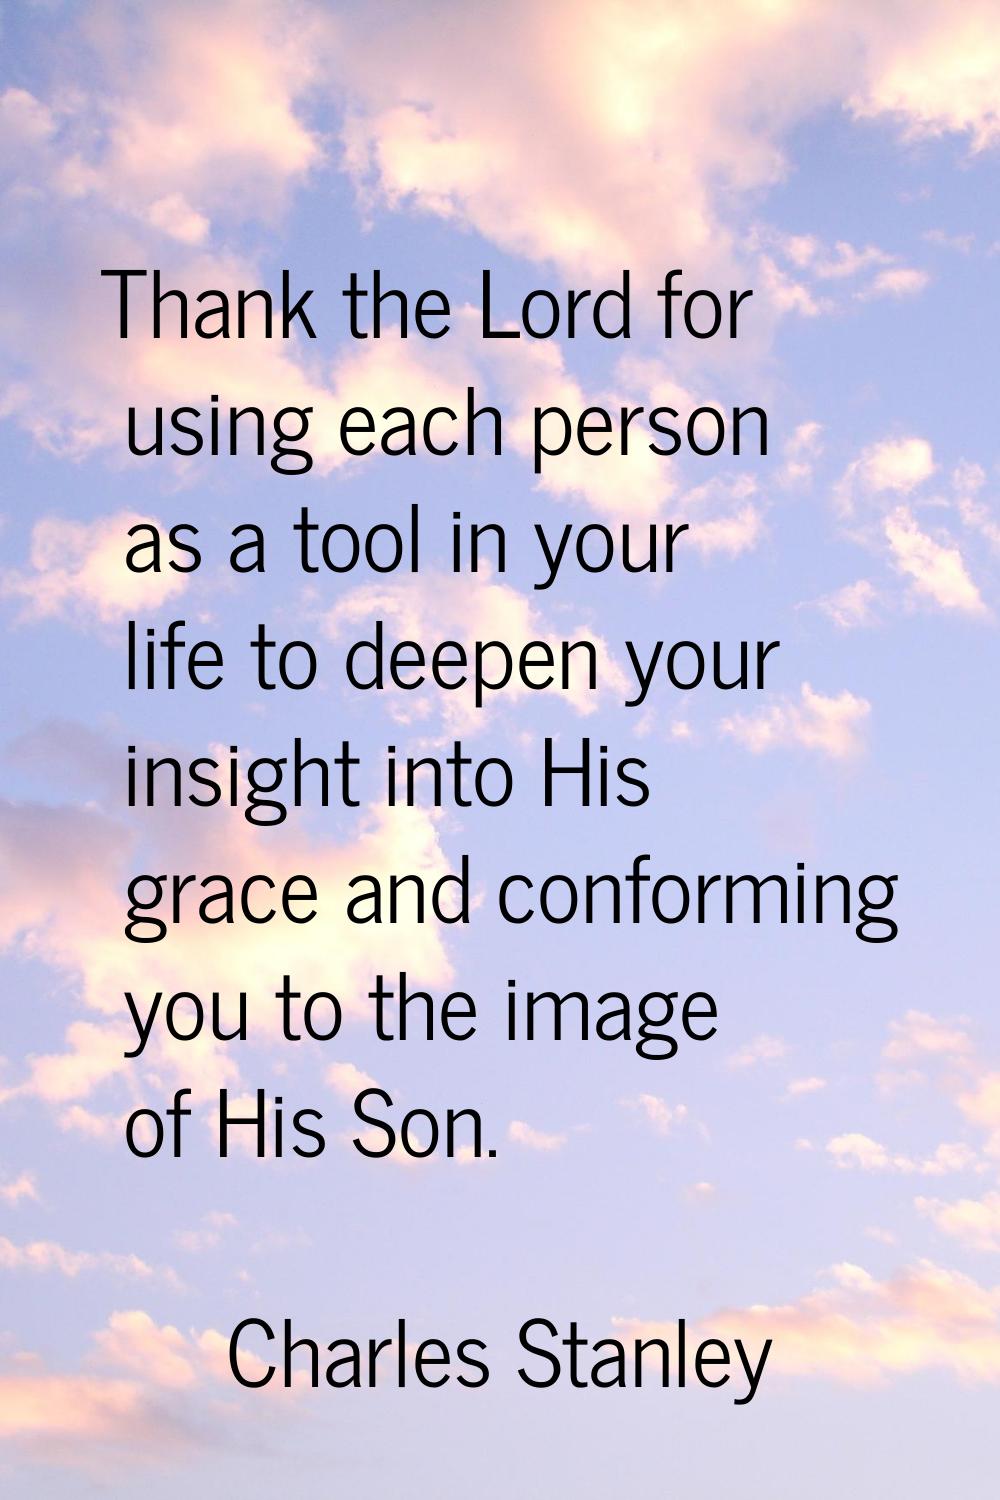 Thank the Lord for using each person as a tool in your life to deepen your insight into His grace a